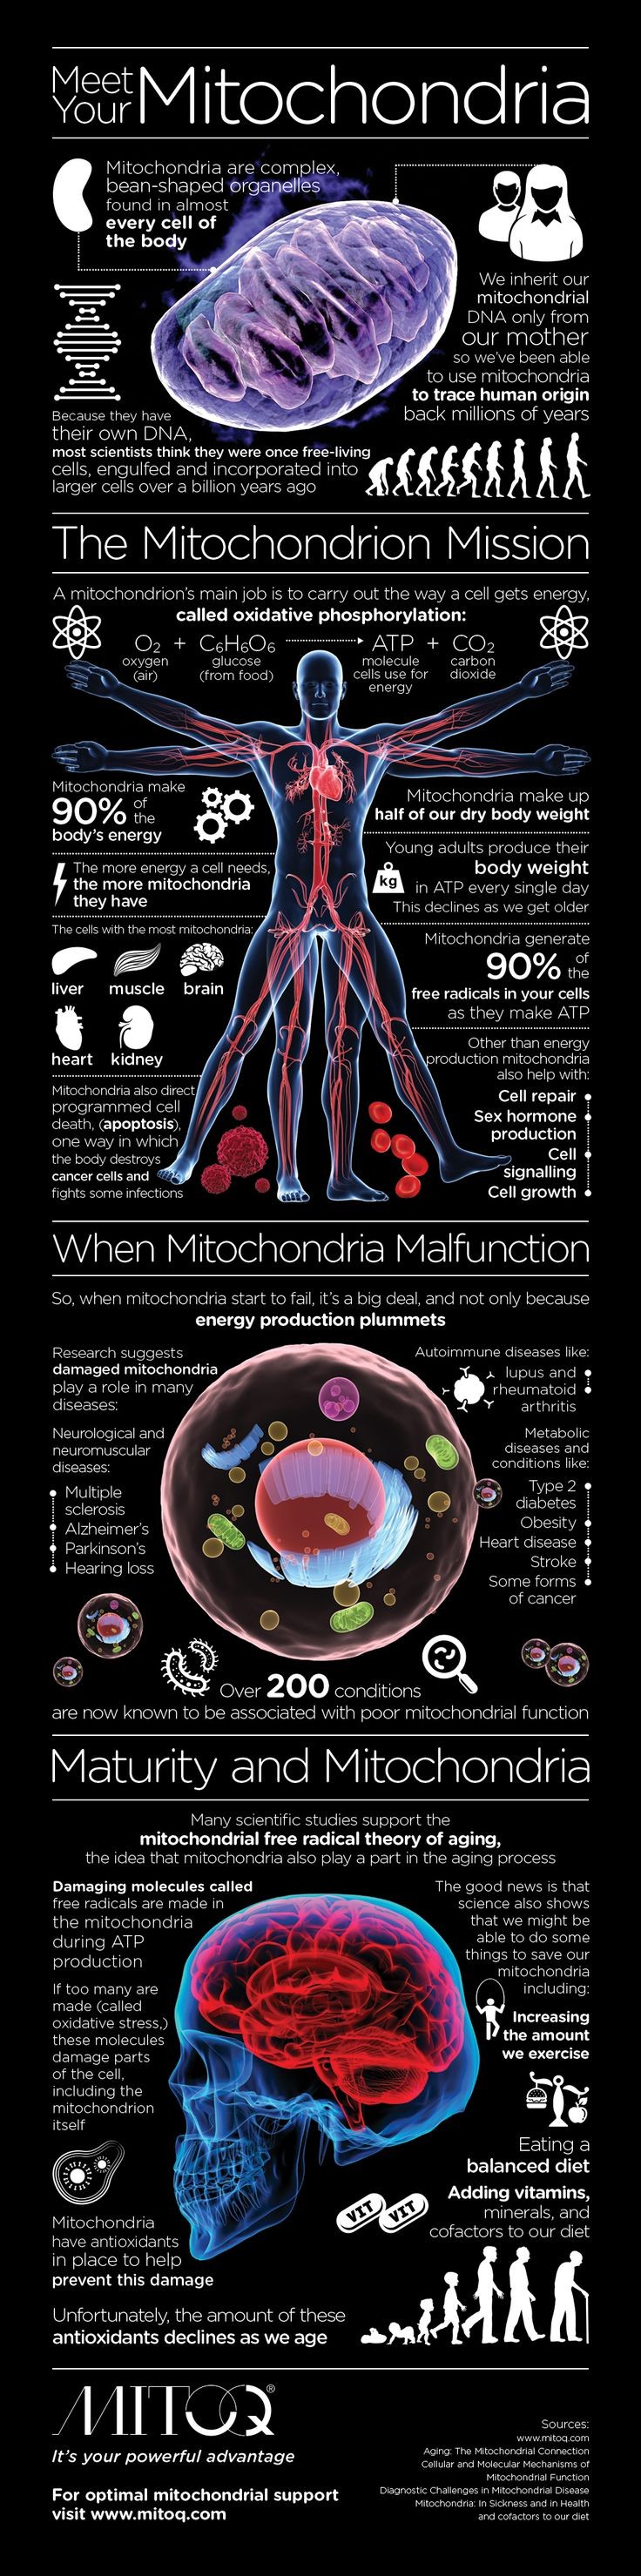 Meet Your Mitochondria #infographic #Health Mitoch...